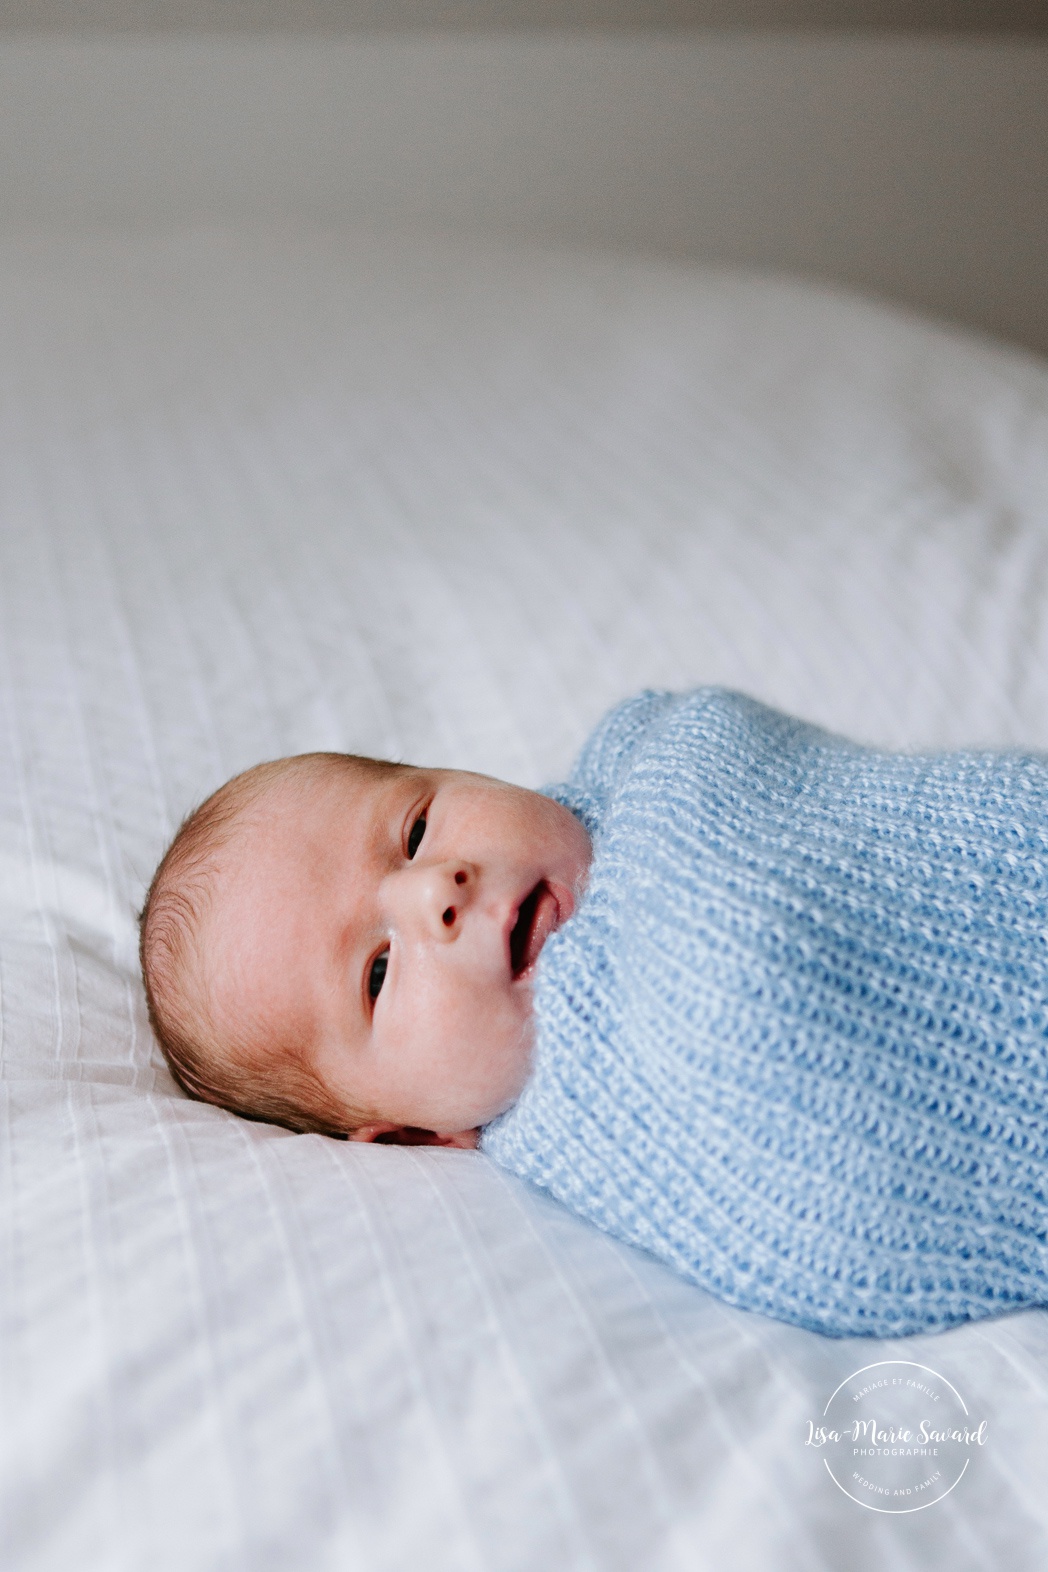 In-home lifestyle newborn session. Newborn photos in nursery. Baby boy wrapped in blanket on bed. Photos de bébé à Montréal. Montreal North Shore newborn photoshoot.